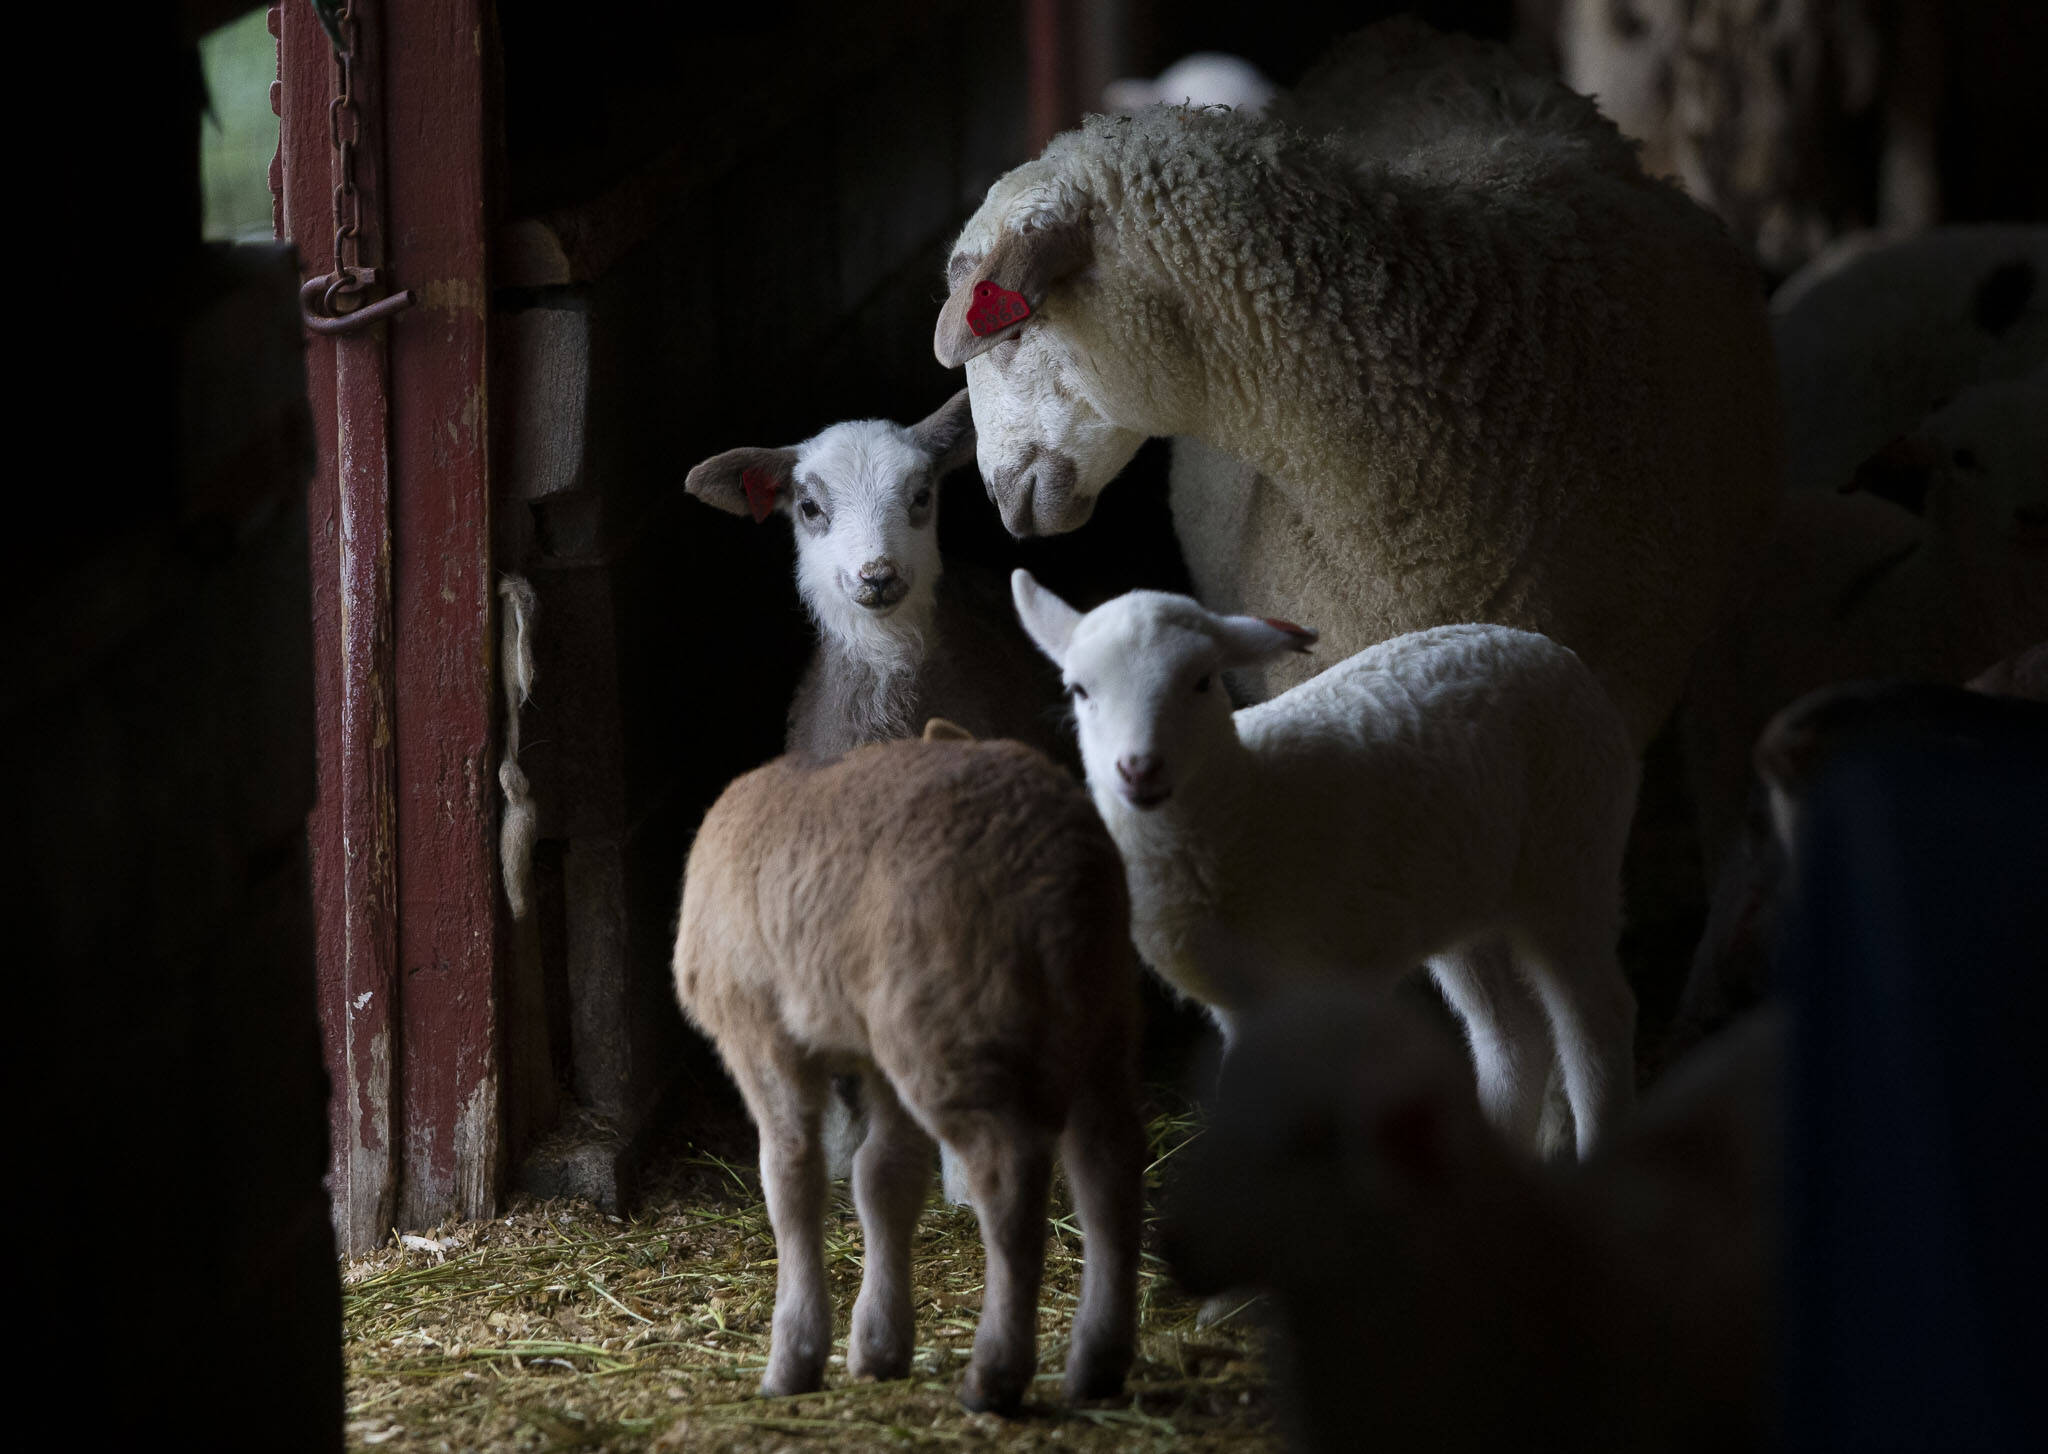 Lambs and sheep gather together in the barn while it rains at On The Lamb farm Tuesday in Arlington. (Olivia Vanni / The Herald)